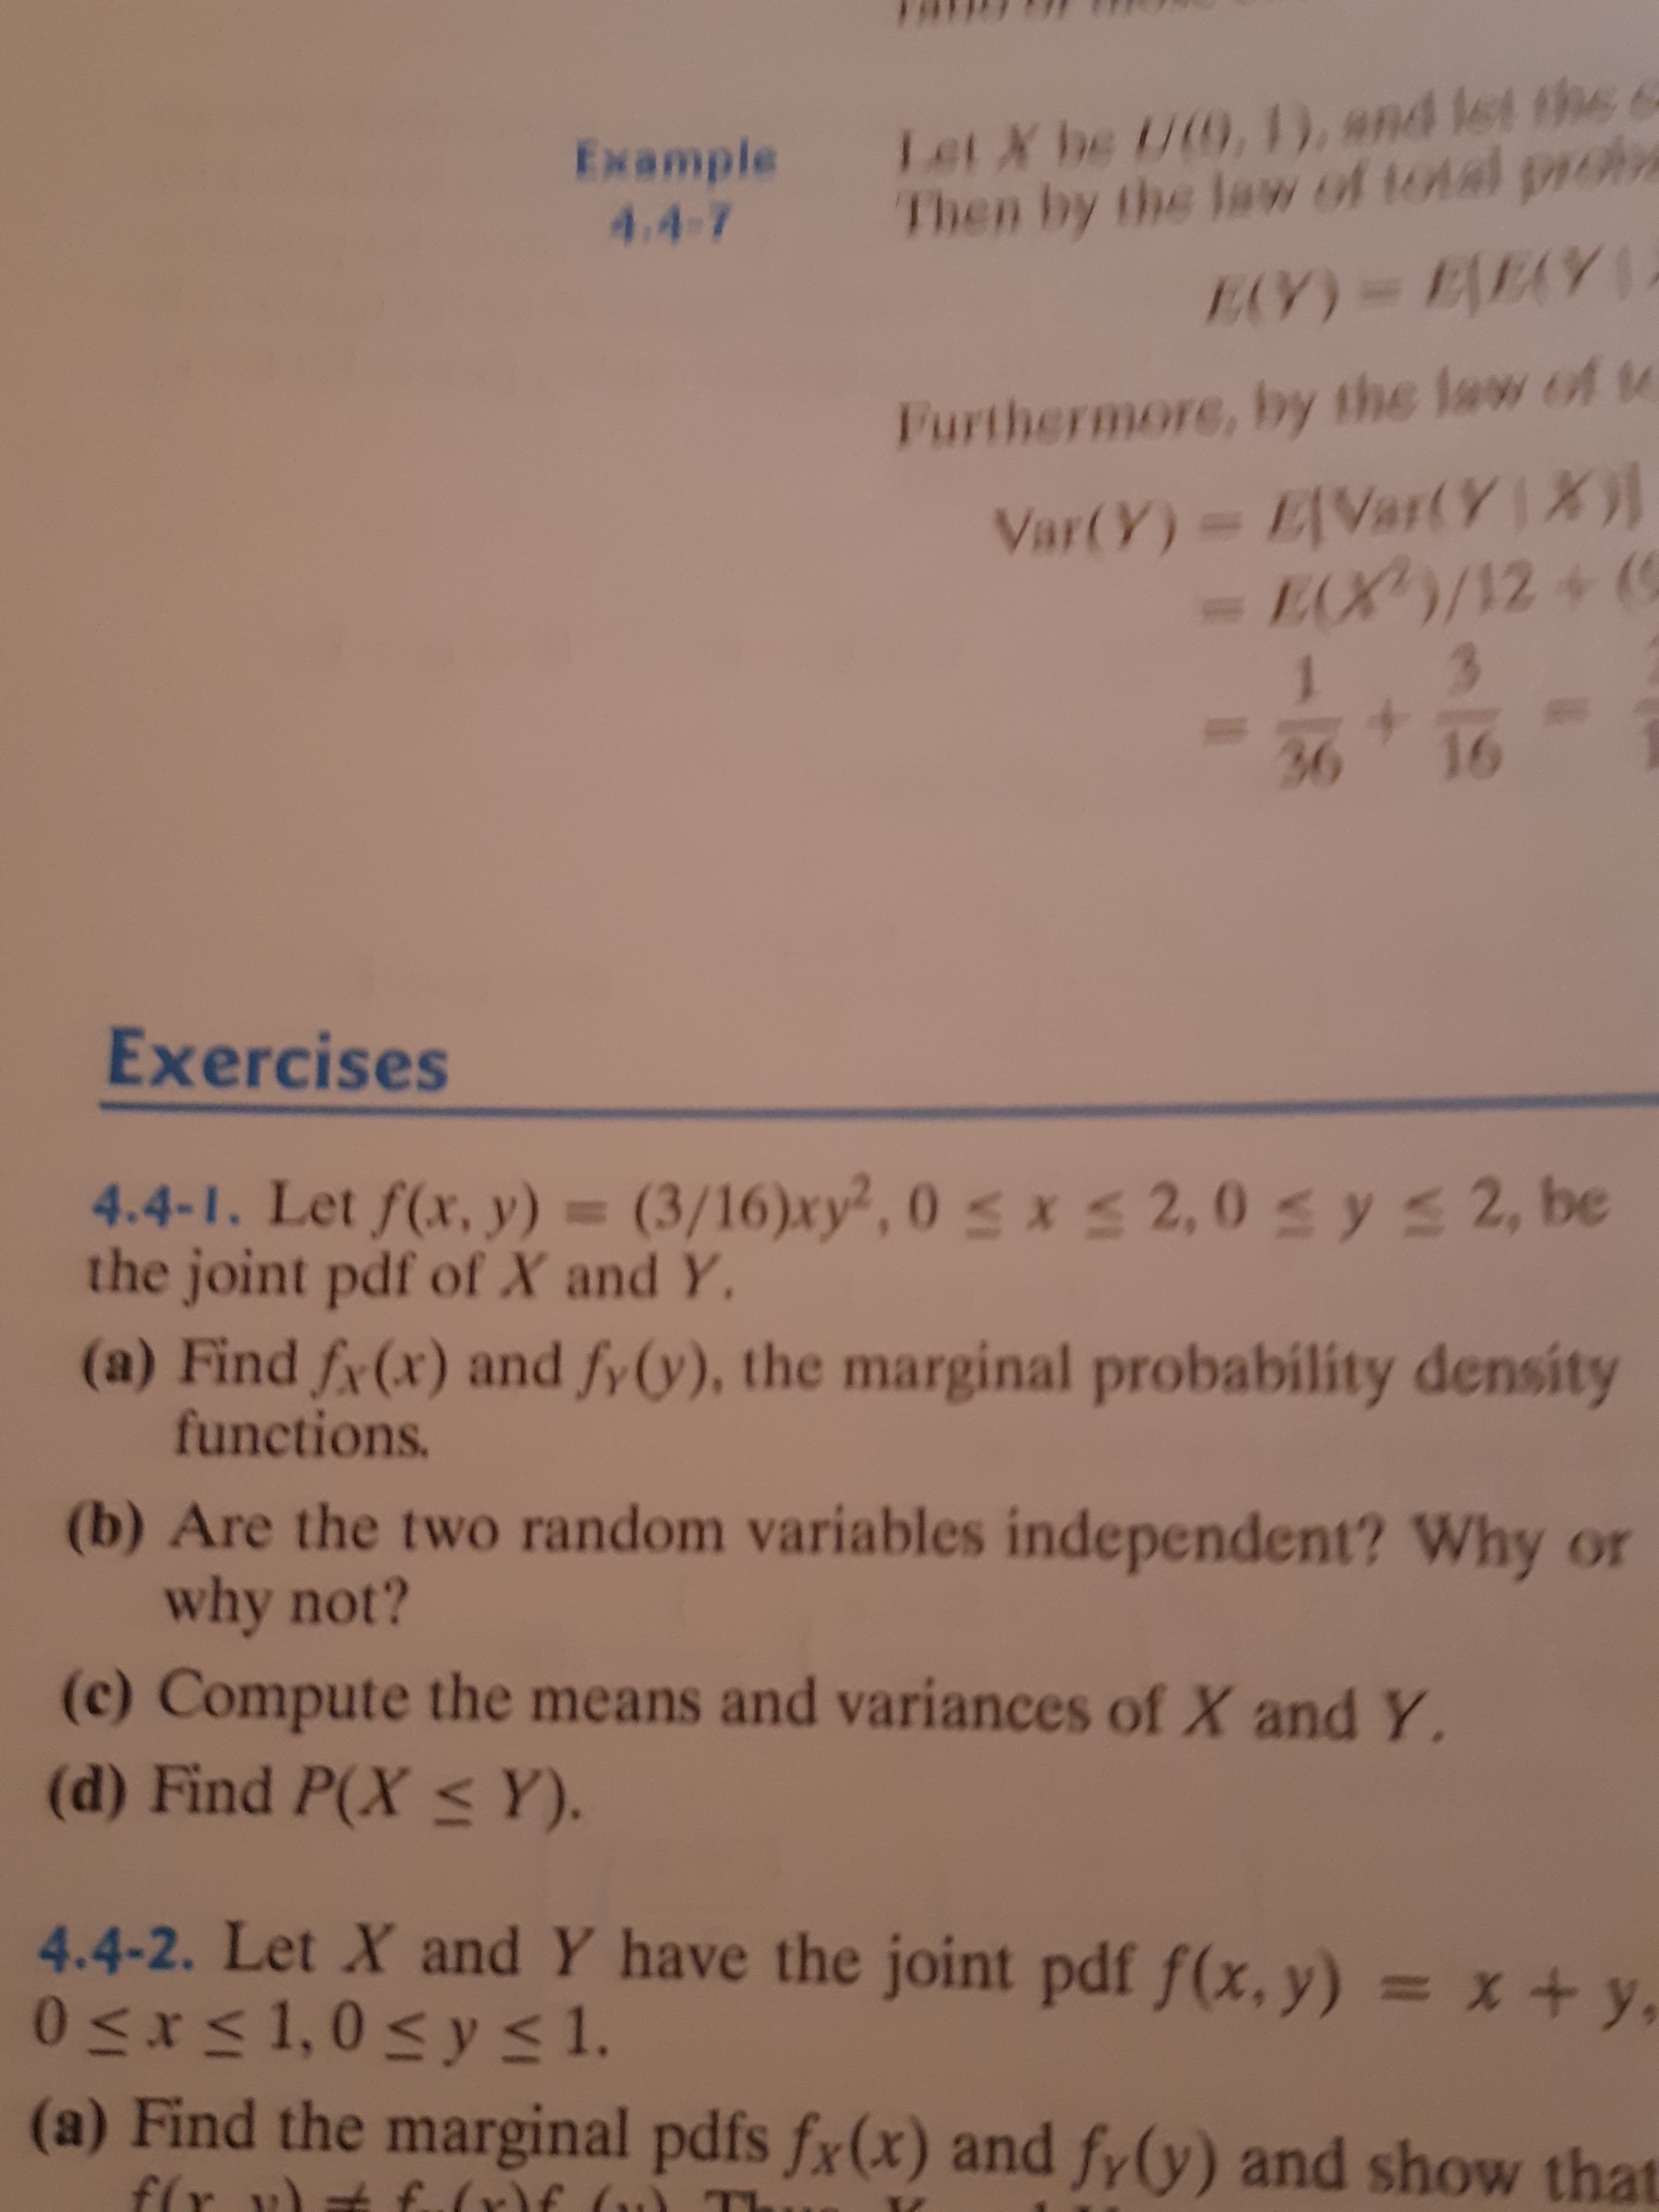 (a) Find fy(x) and fy(y), the marginal probability density
functions.
(b) Are the two random variables independent? Why or
why not?
(c) Compute the means and variances of X and Y.
